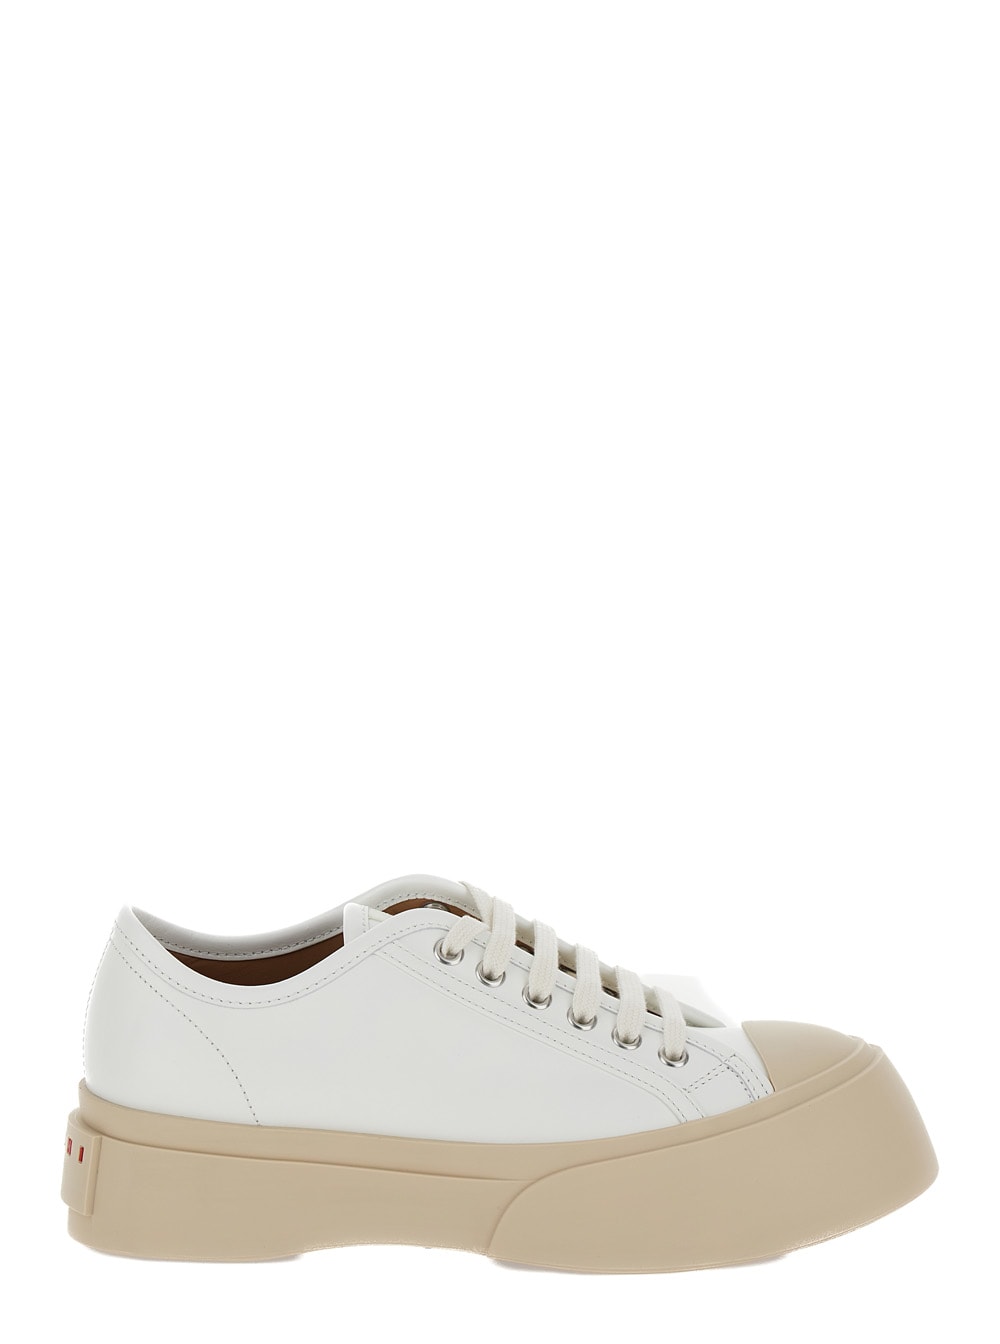 pablo White Sneakers With Lace Up Closure In Leather Woman